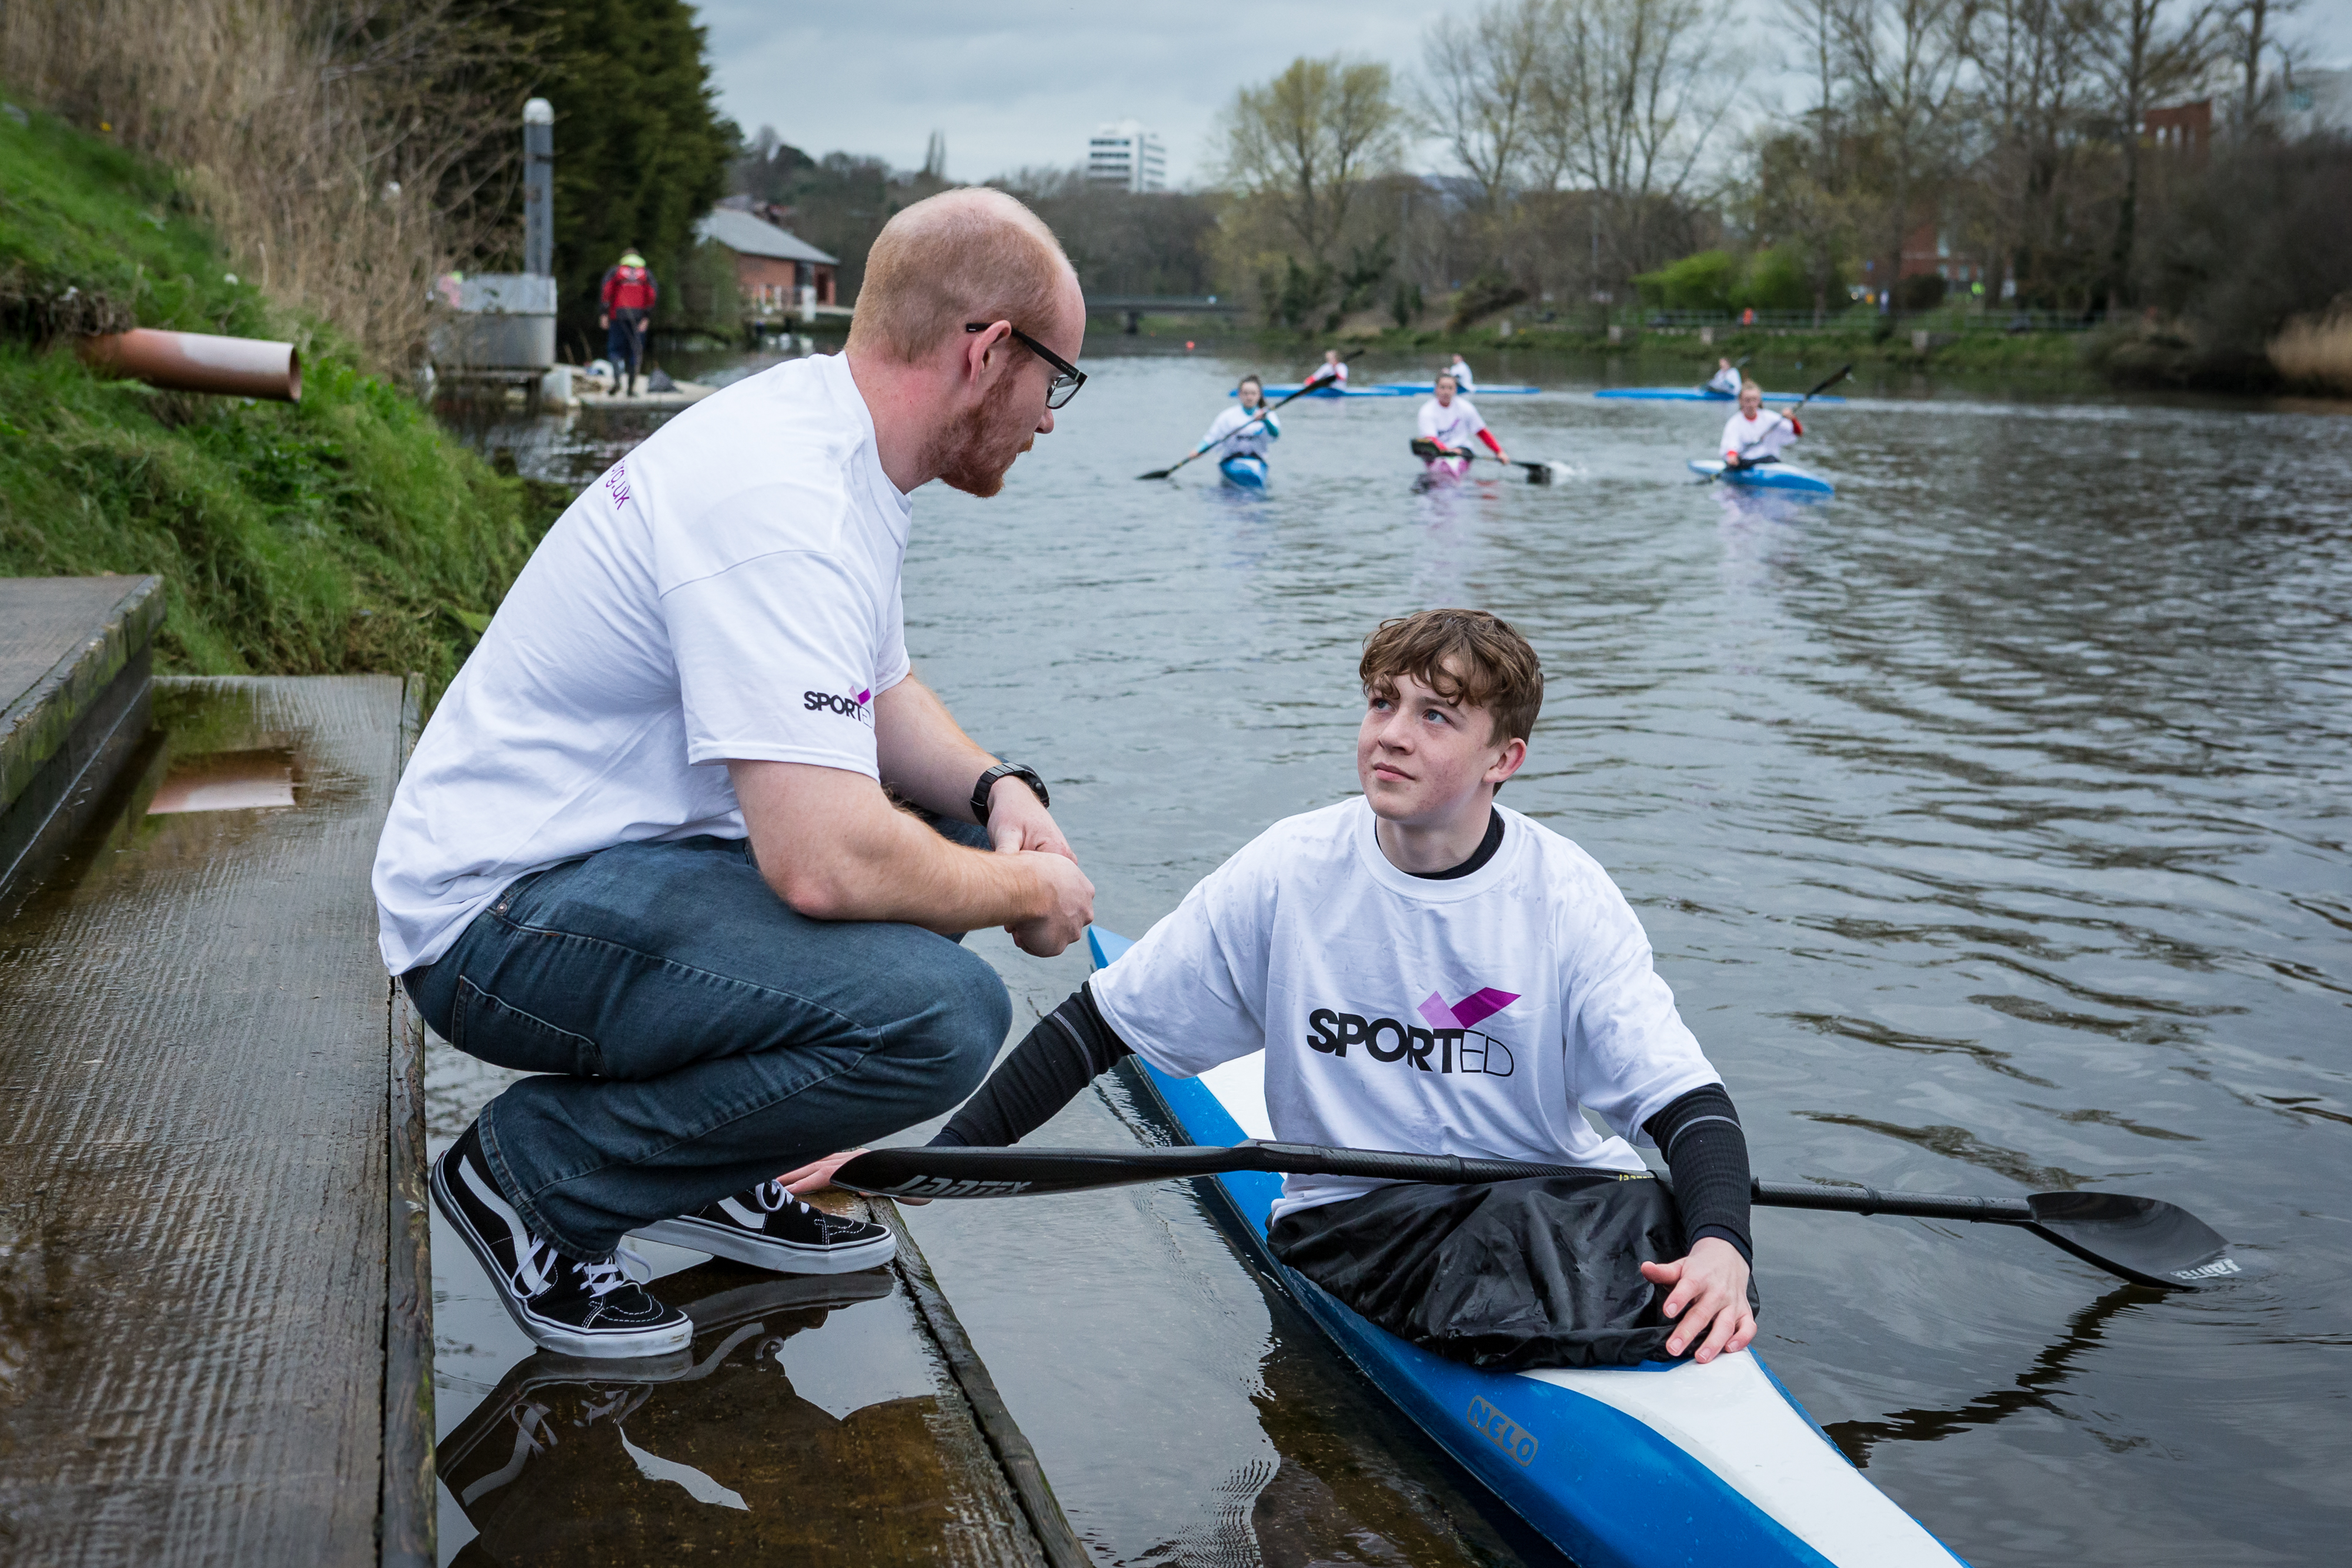 Young people kayaking with Sported charity